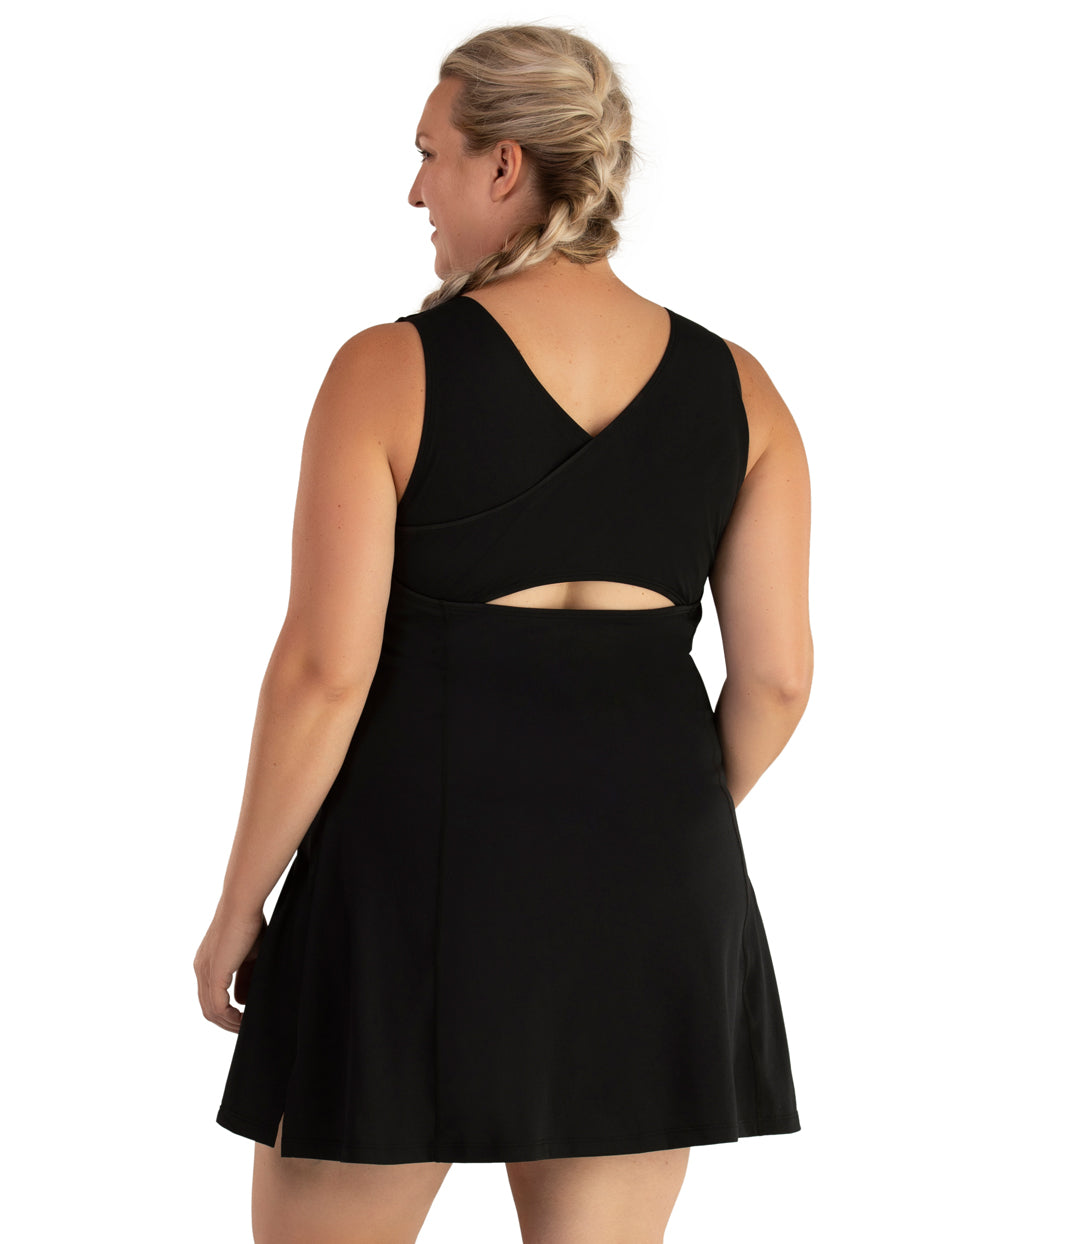 Plus size woman, back view, wearing JunoActive plus size AquaSport Crossback Swim Dress Pacific Blue Black. The back of the swim dress is black with an overlapping crossback detail. The dress has a keyhole at mid back, slight a-line shape and ends mid-thigh.